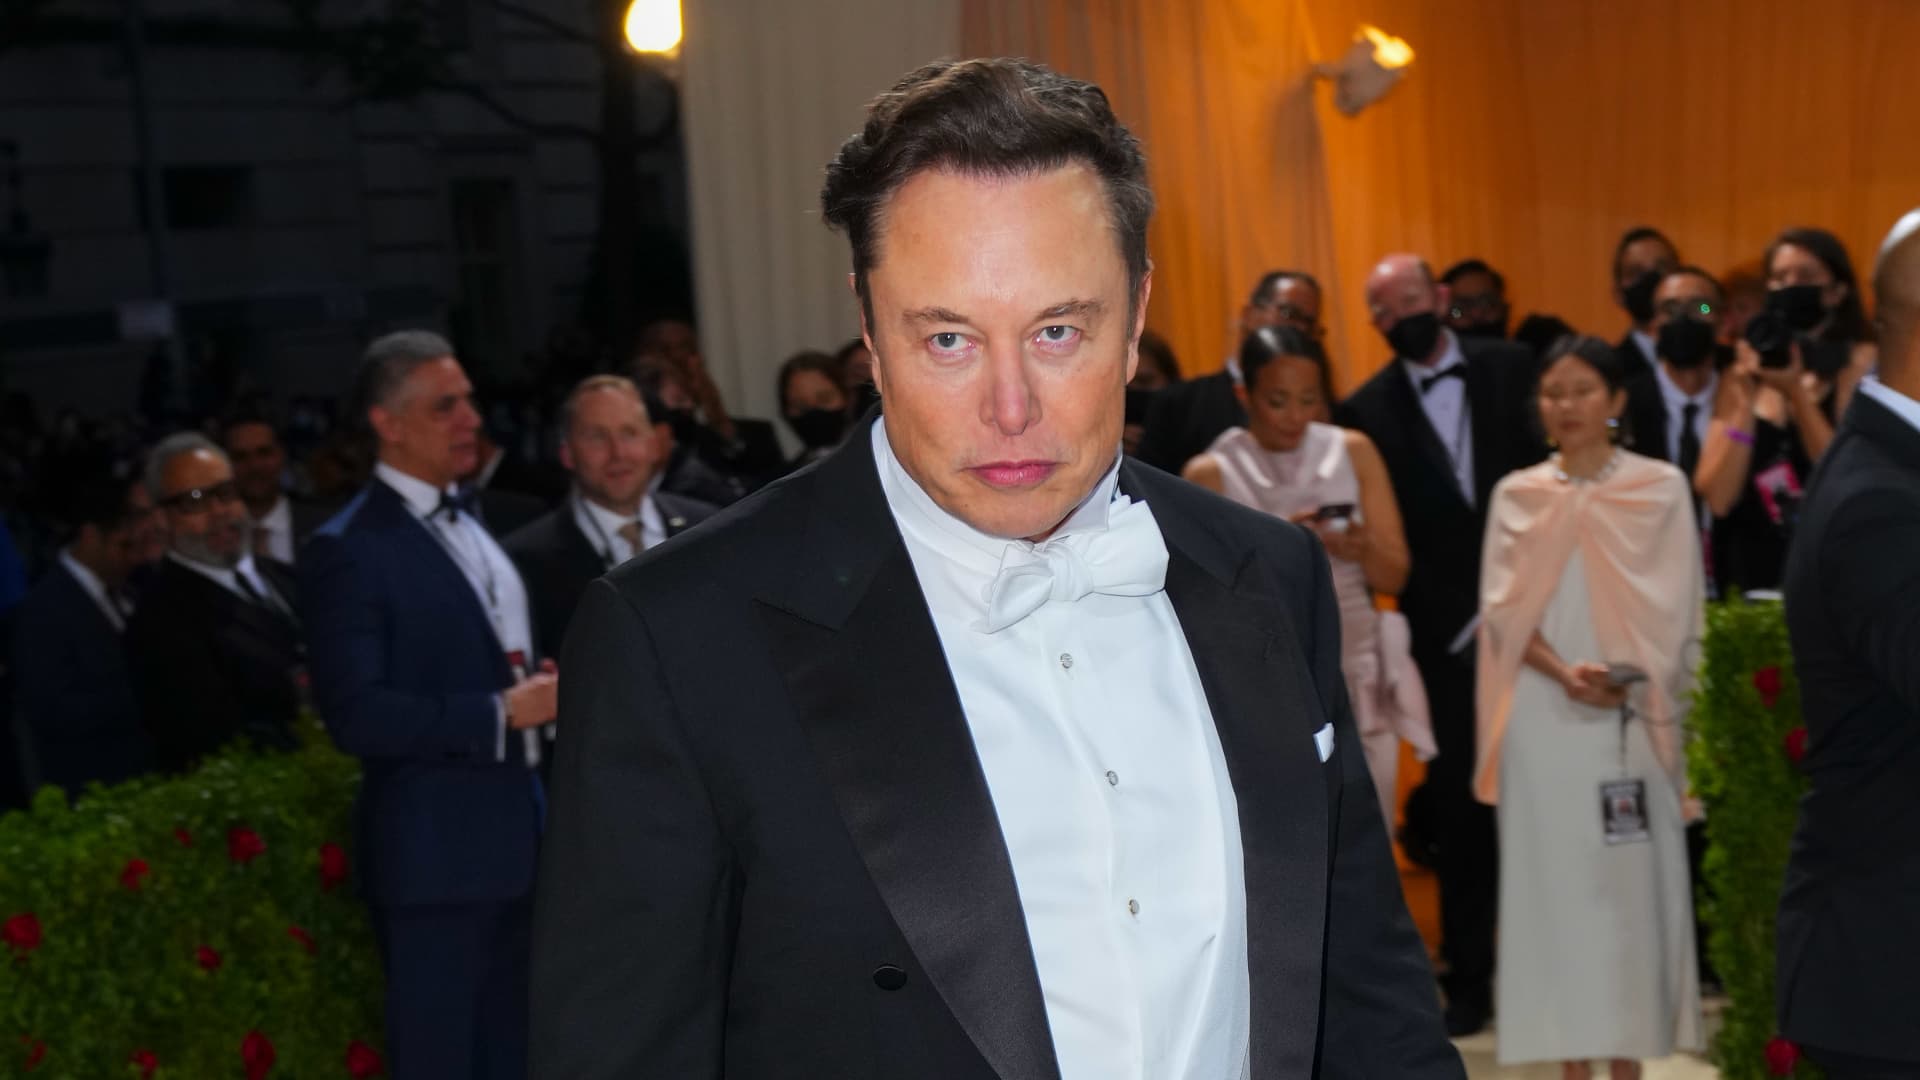 Tesla stock has dropped more than 35% since Elon Musk first said he’d buy Twitter Auto Recent